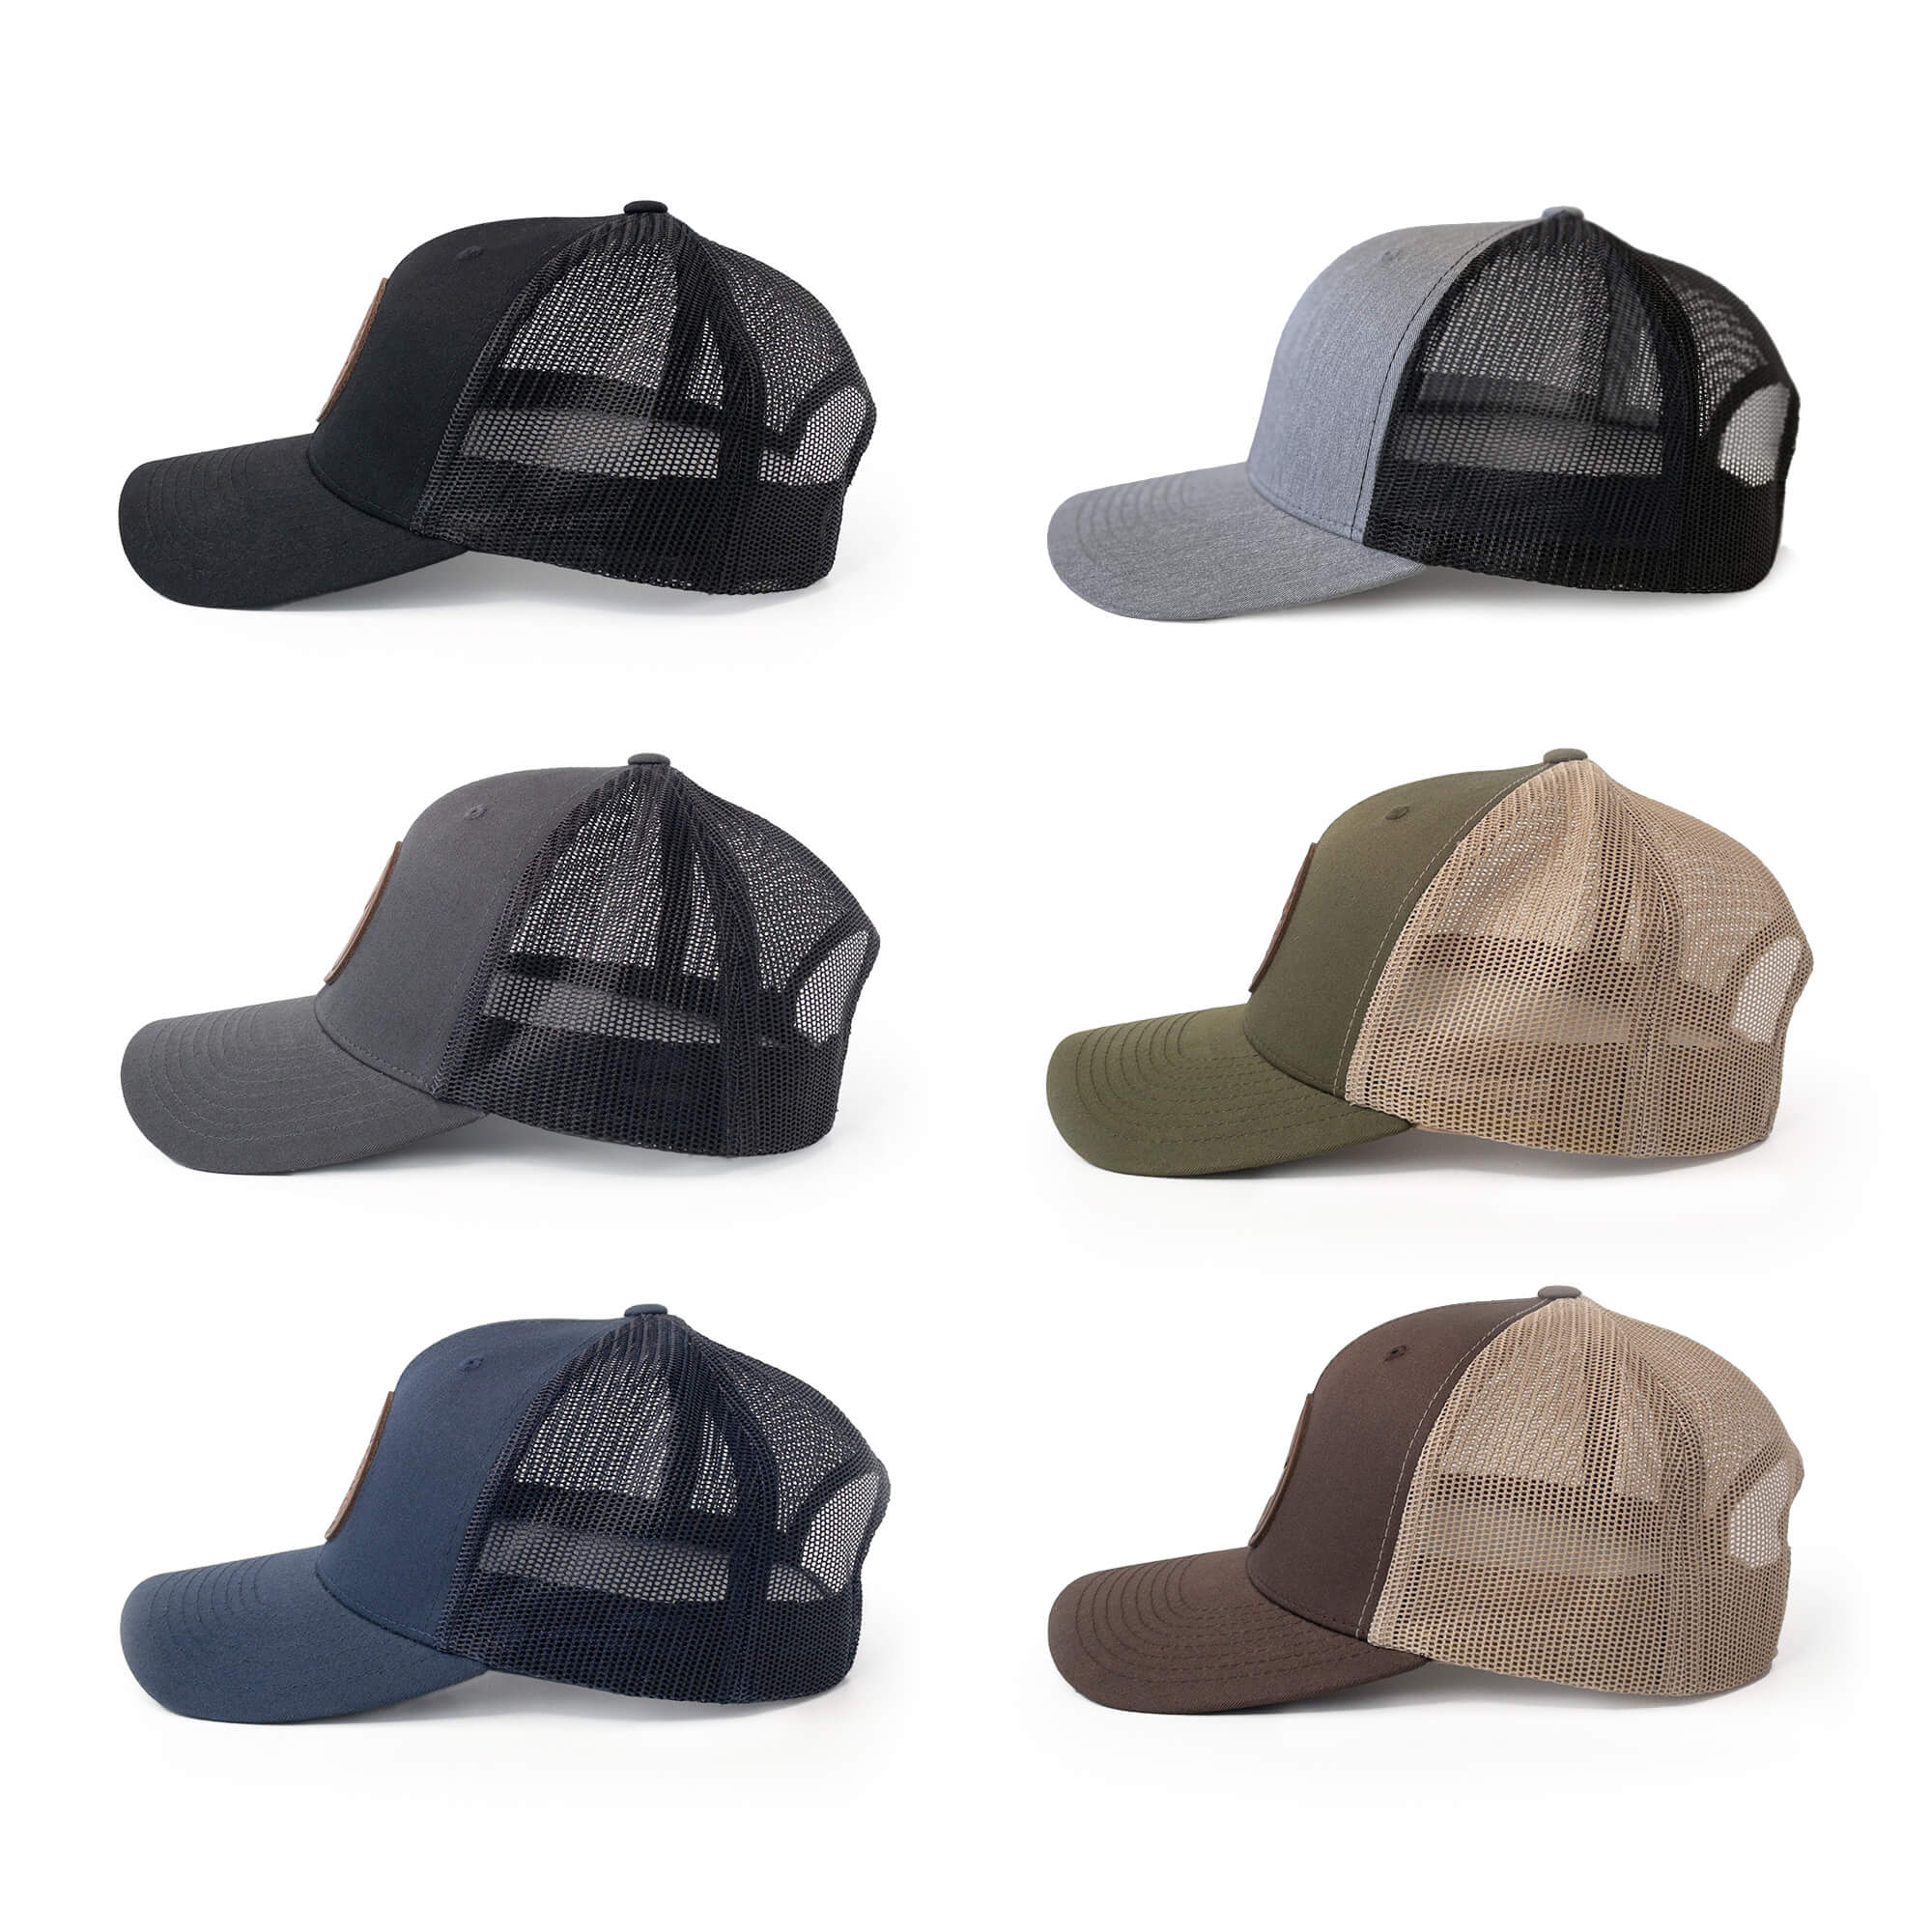 Leather patch trucker hats available in 6 colors | BLACK-004-006, CHARC-004-006, NAVY-004-006, HGREY-004-006, MOSS-004-006, BROWN-004-006